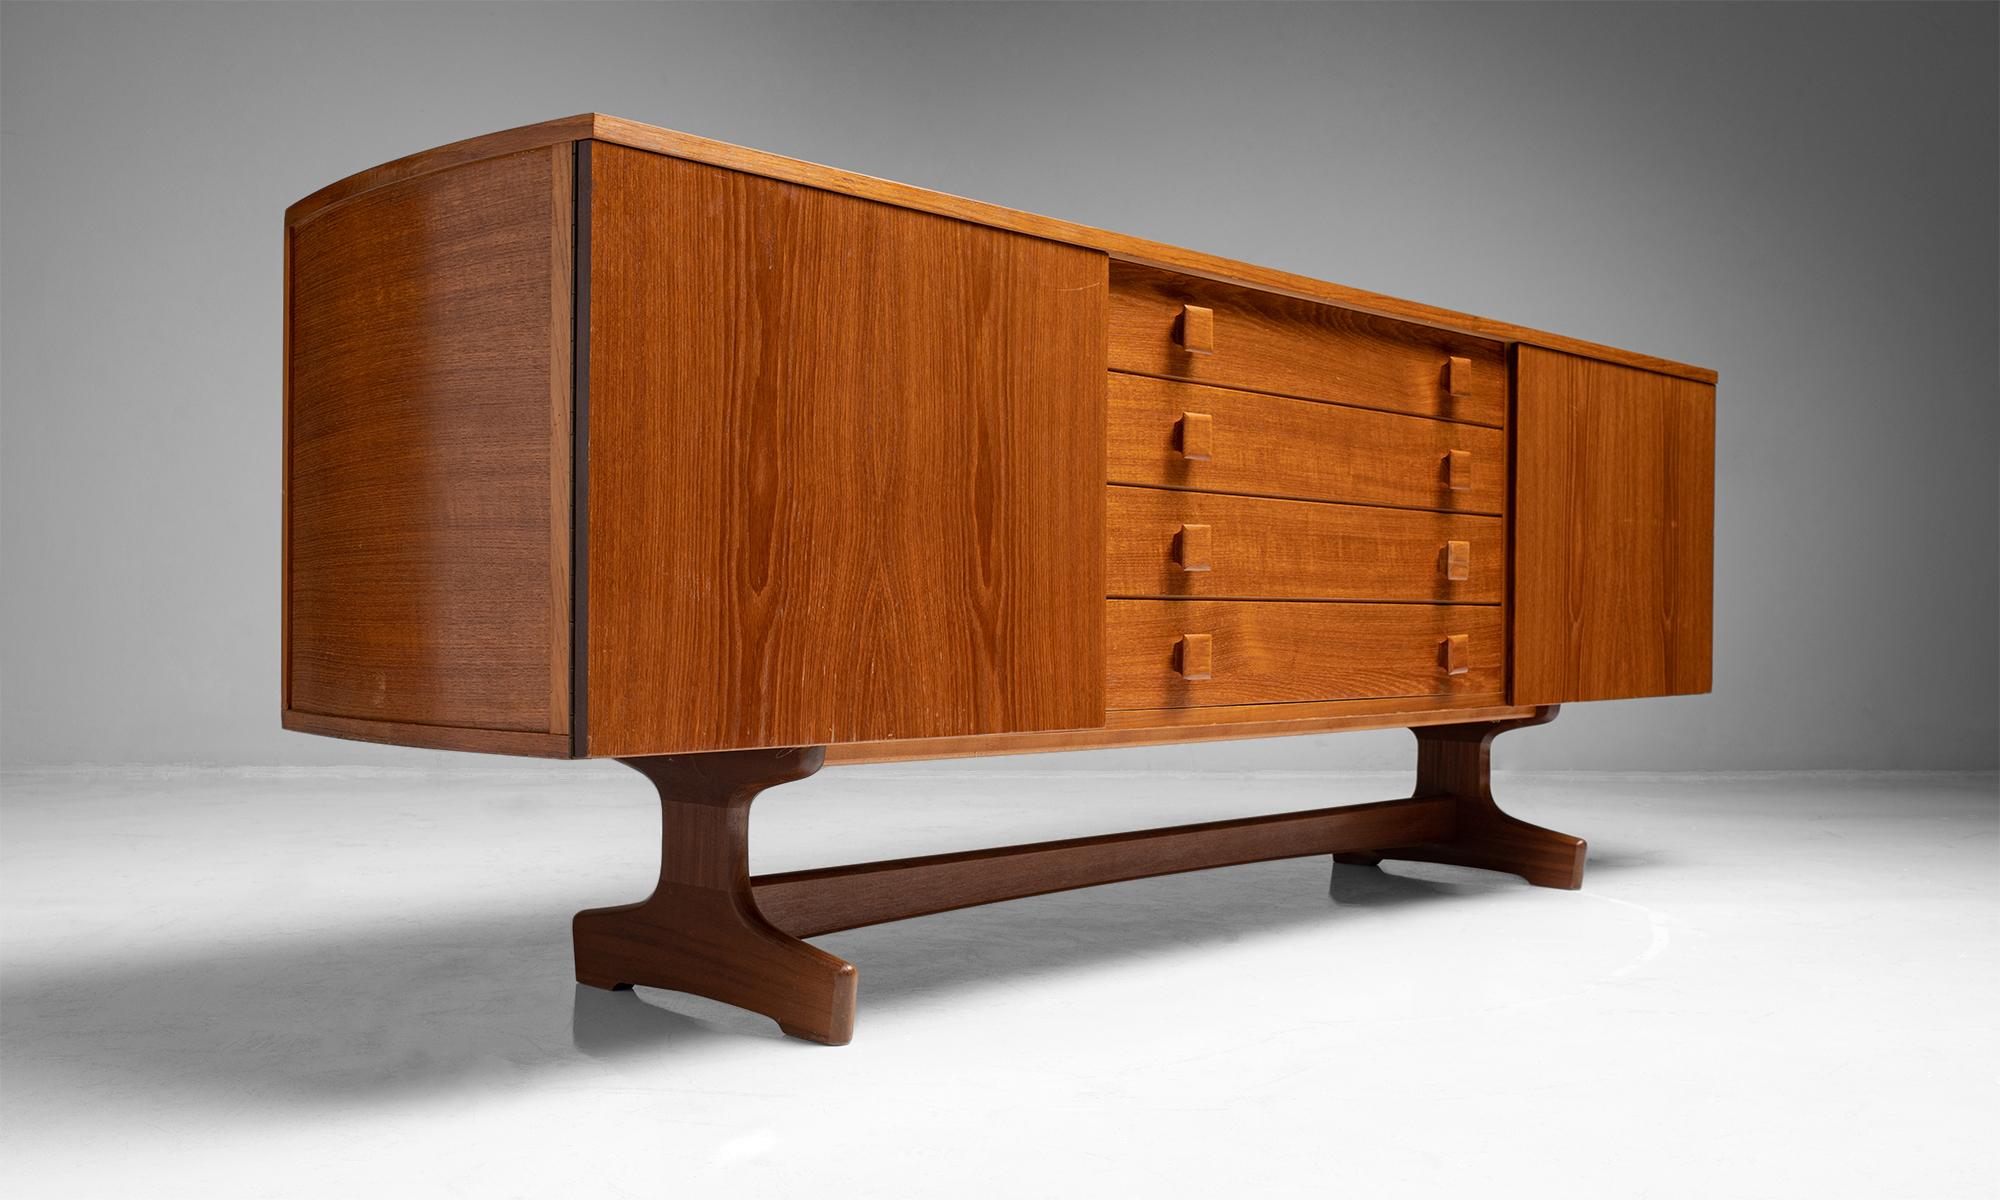 Vanson sideboard
England Circa 1960
Teak sideboard by Vanson with veneered back and birch lined interior.
Measures: 79.75” W x 16” D x 38.5” H

$ 5,800.